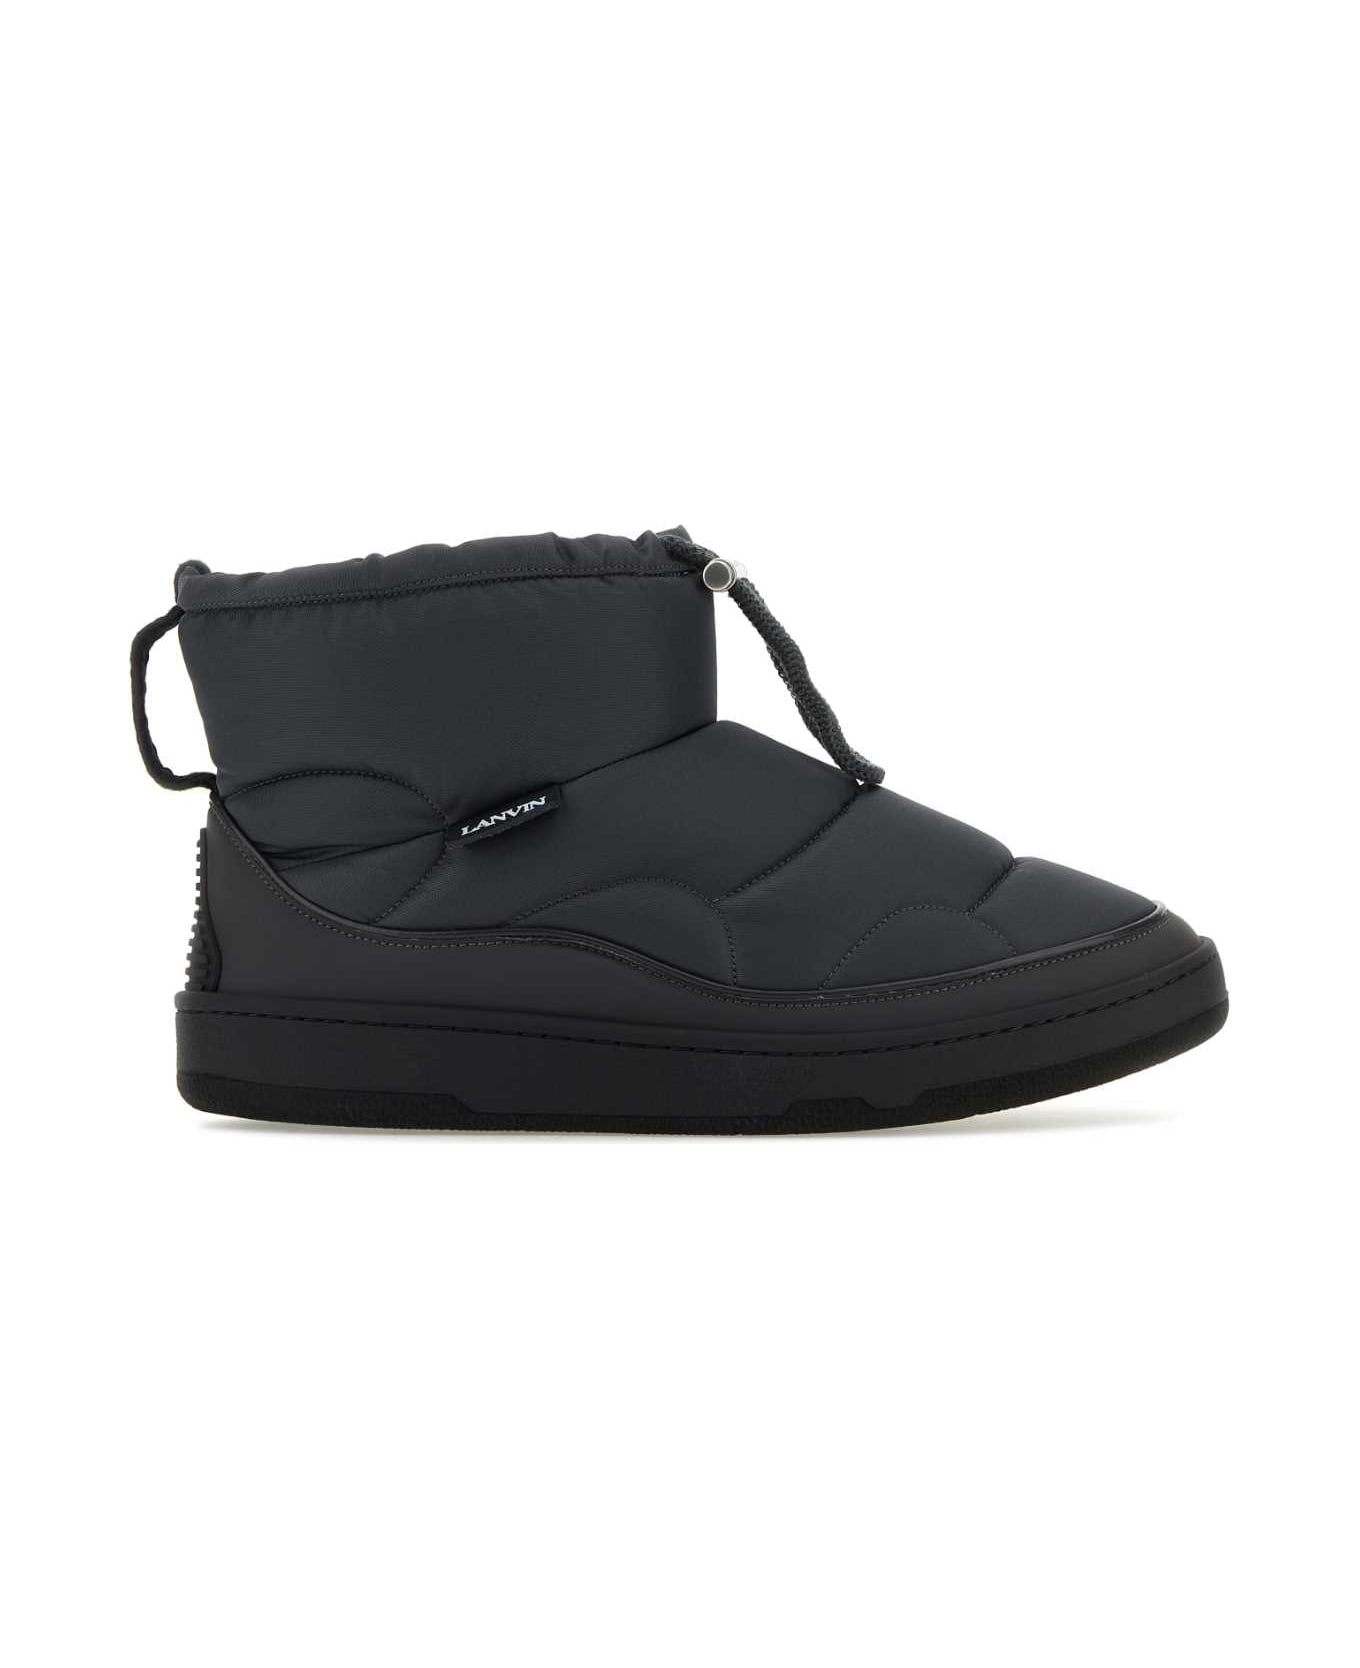 Lanvin Graphite Fabric Curb Snow Ankle Boots - LODEN